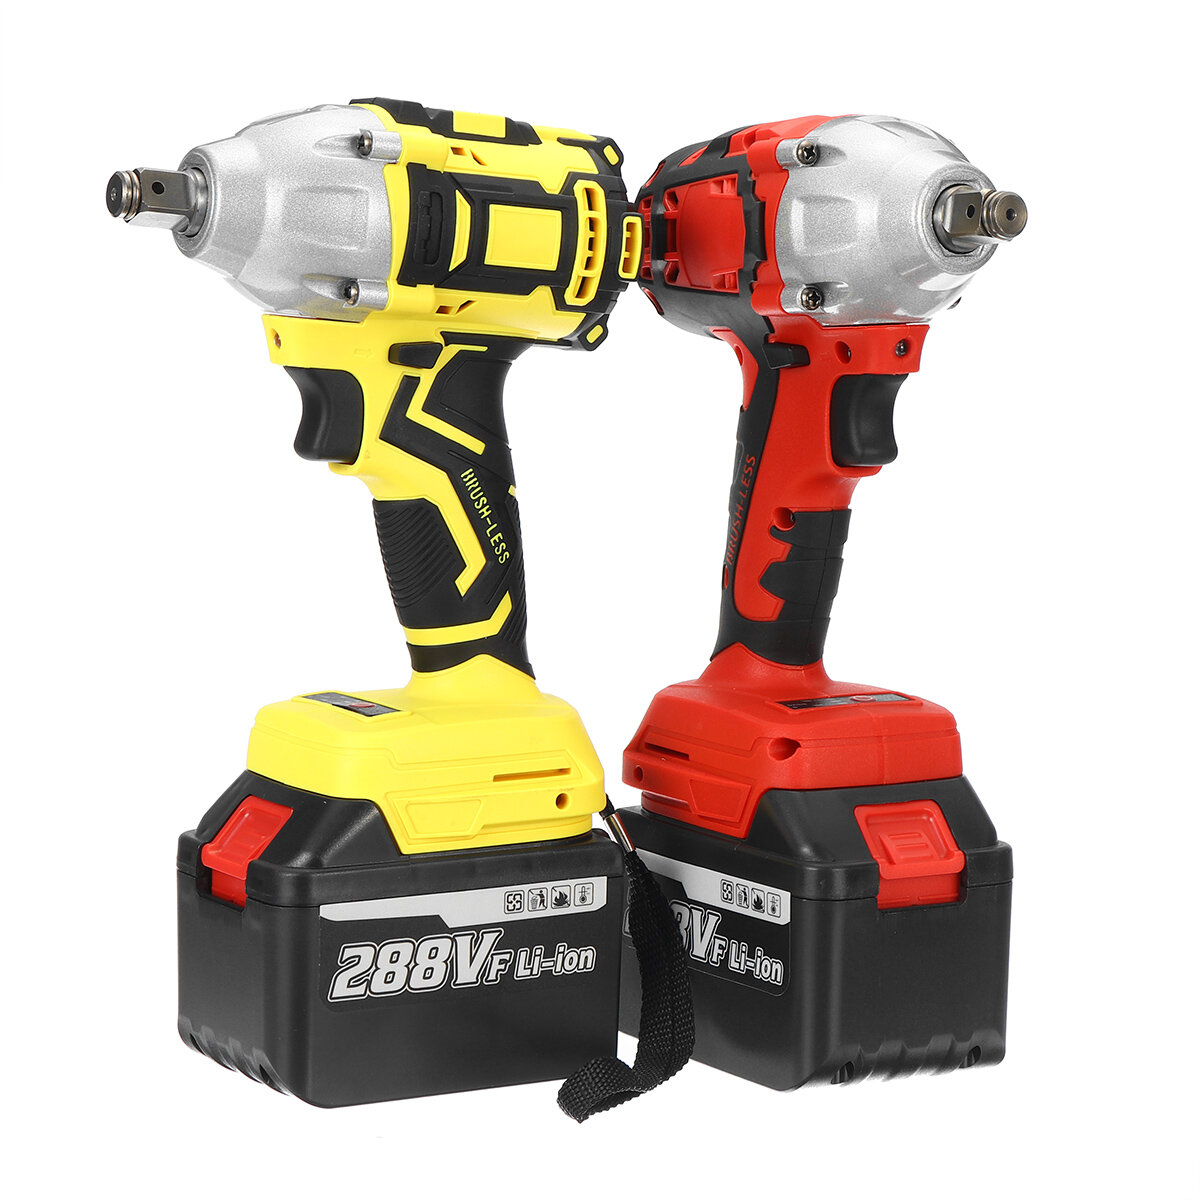 Image of 288VF Brushless Cordless Electric Wrench 520Nm 0-3000RPM Power Tool W/ 1pc Battery